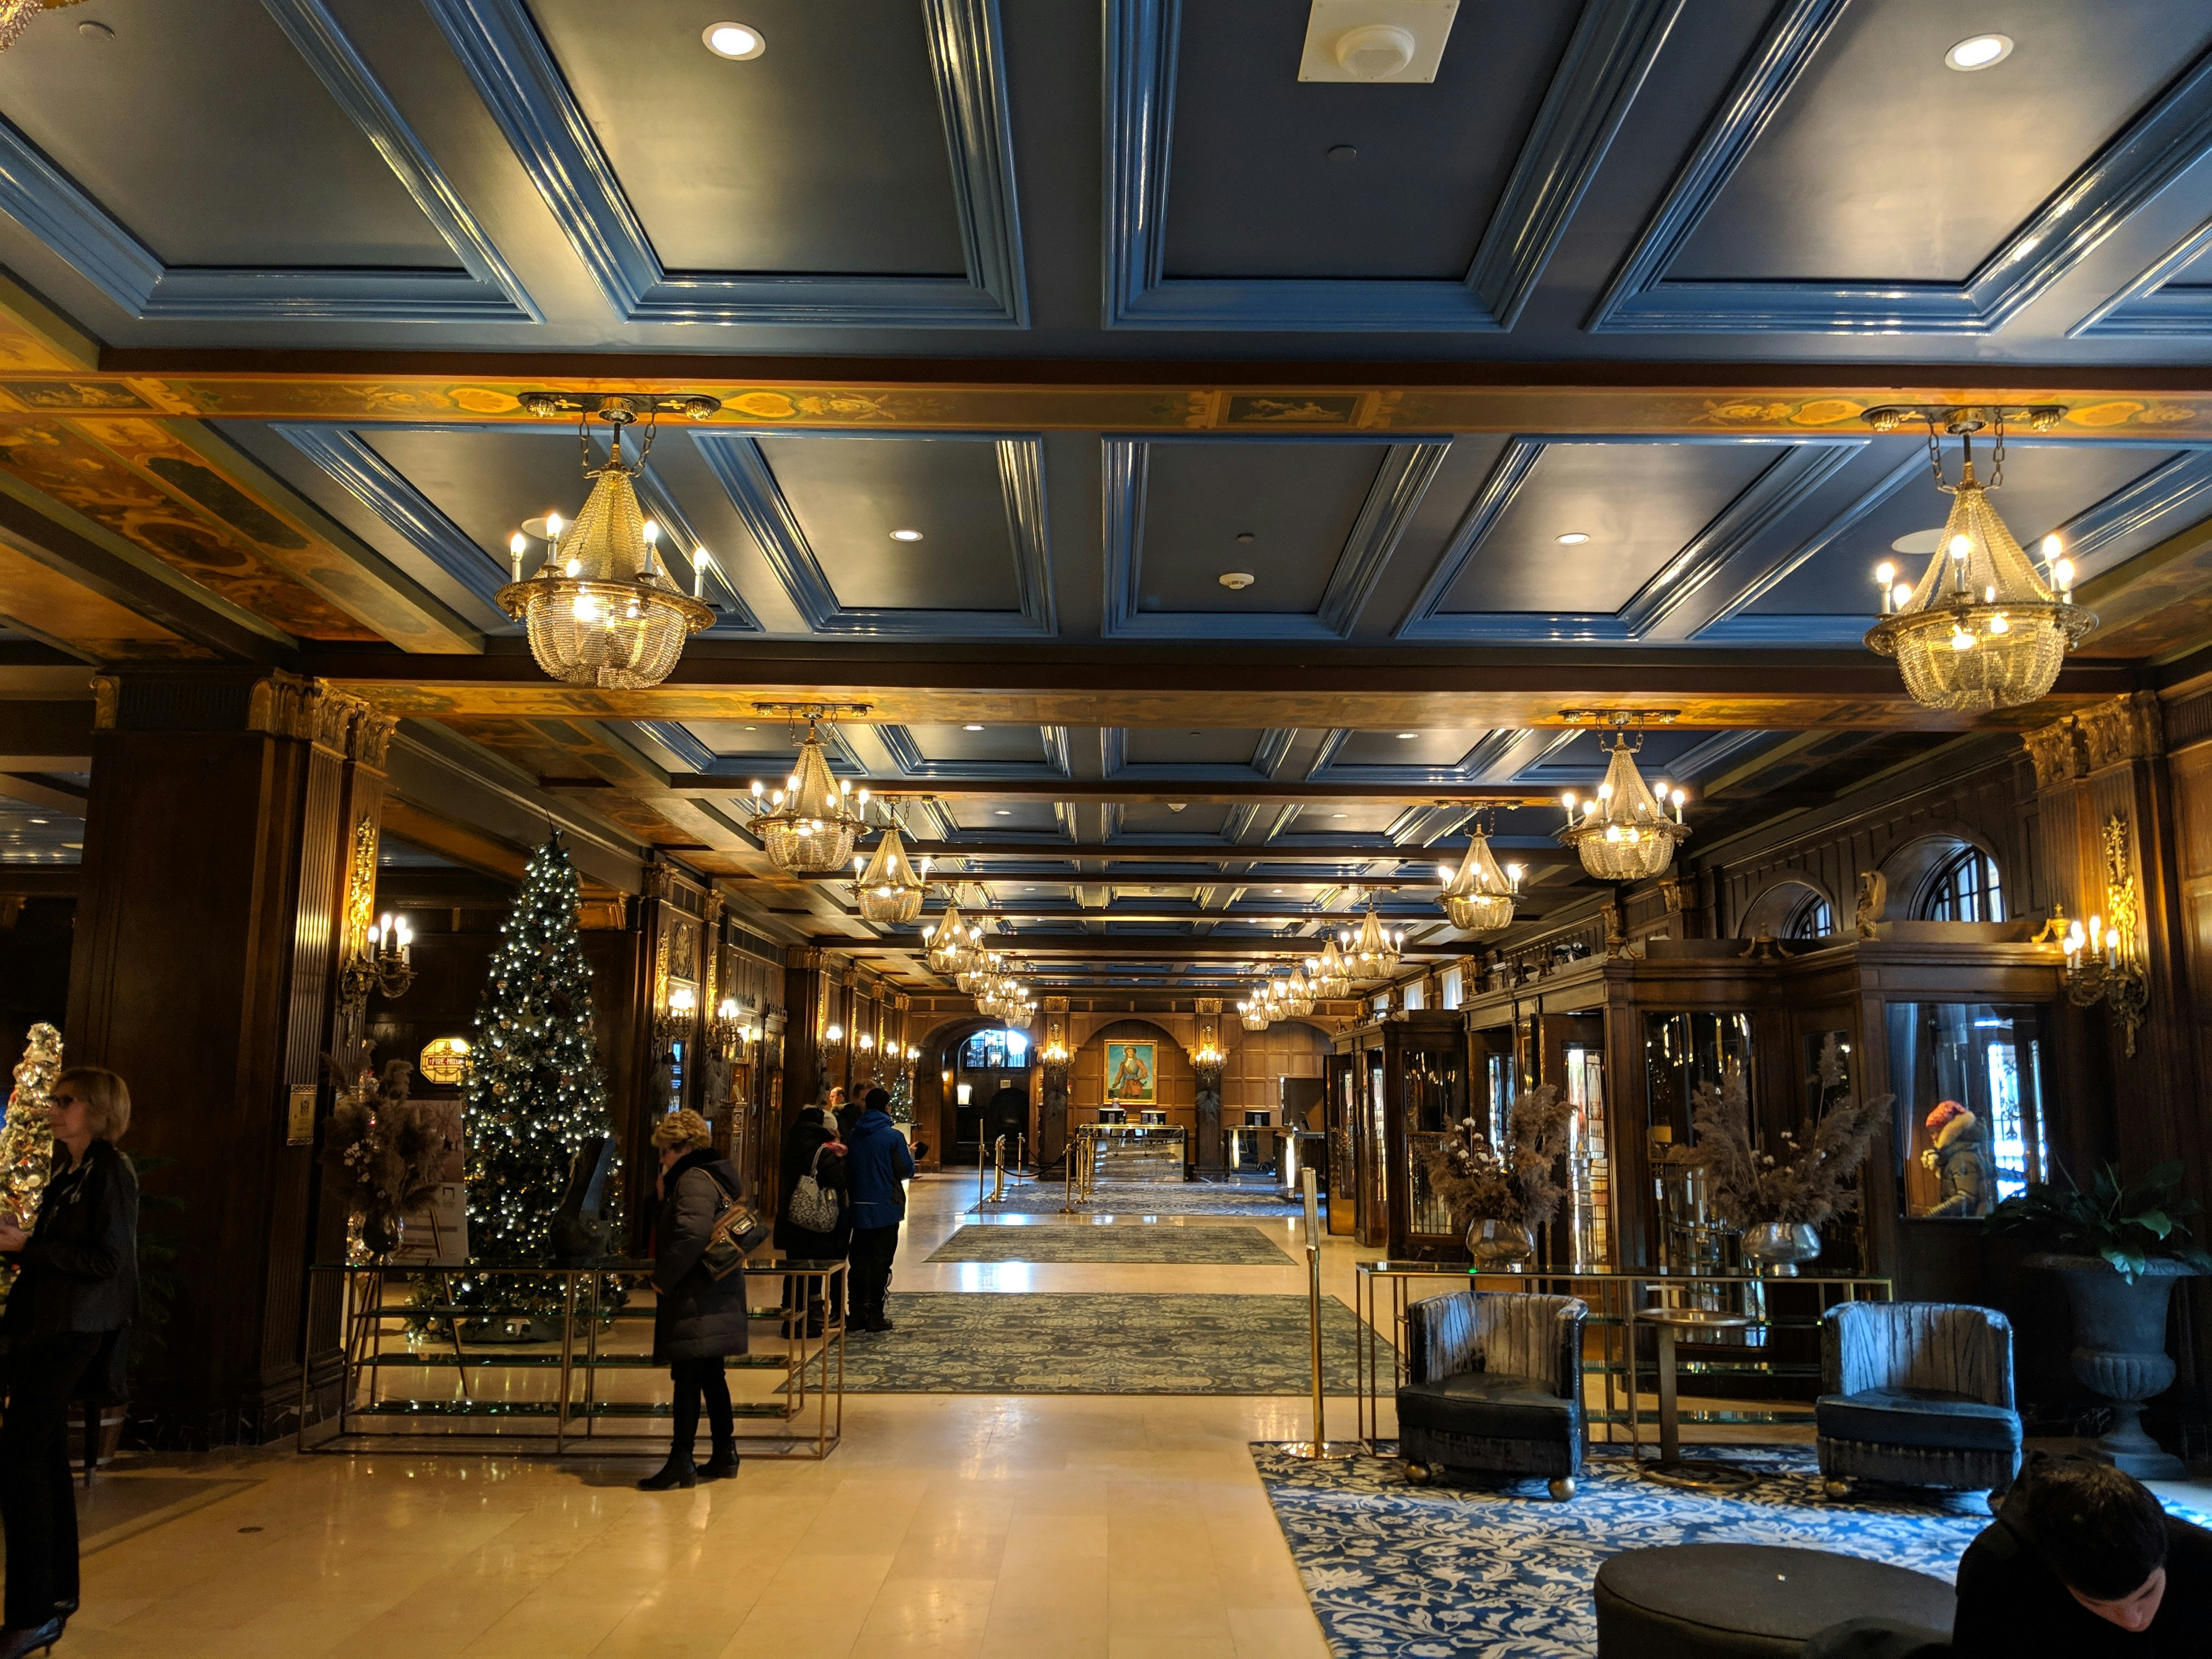 Chateau Frontenac in Quebec City's charming lobby